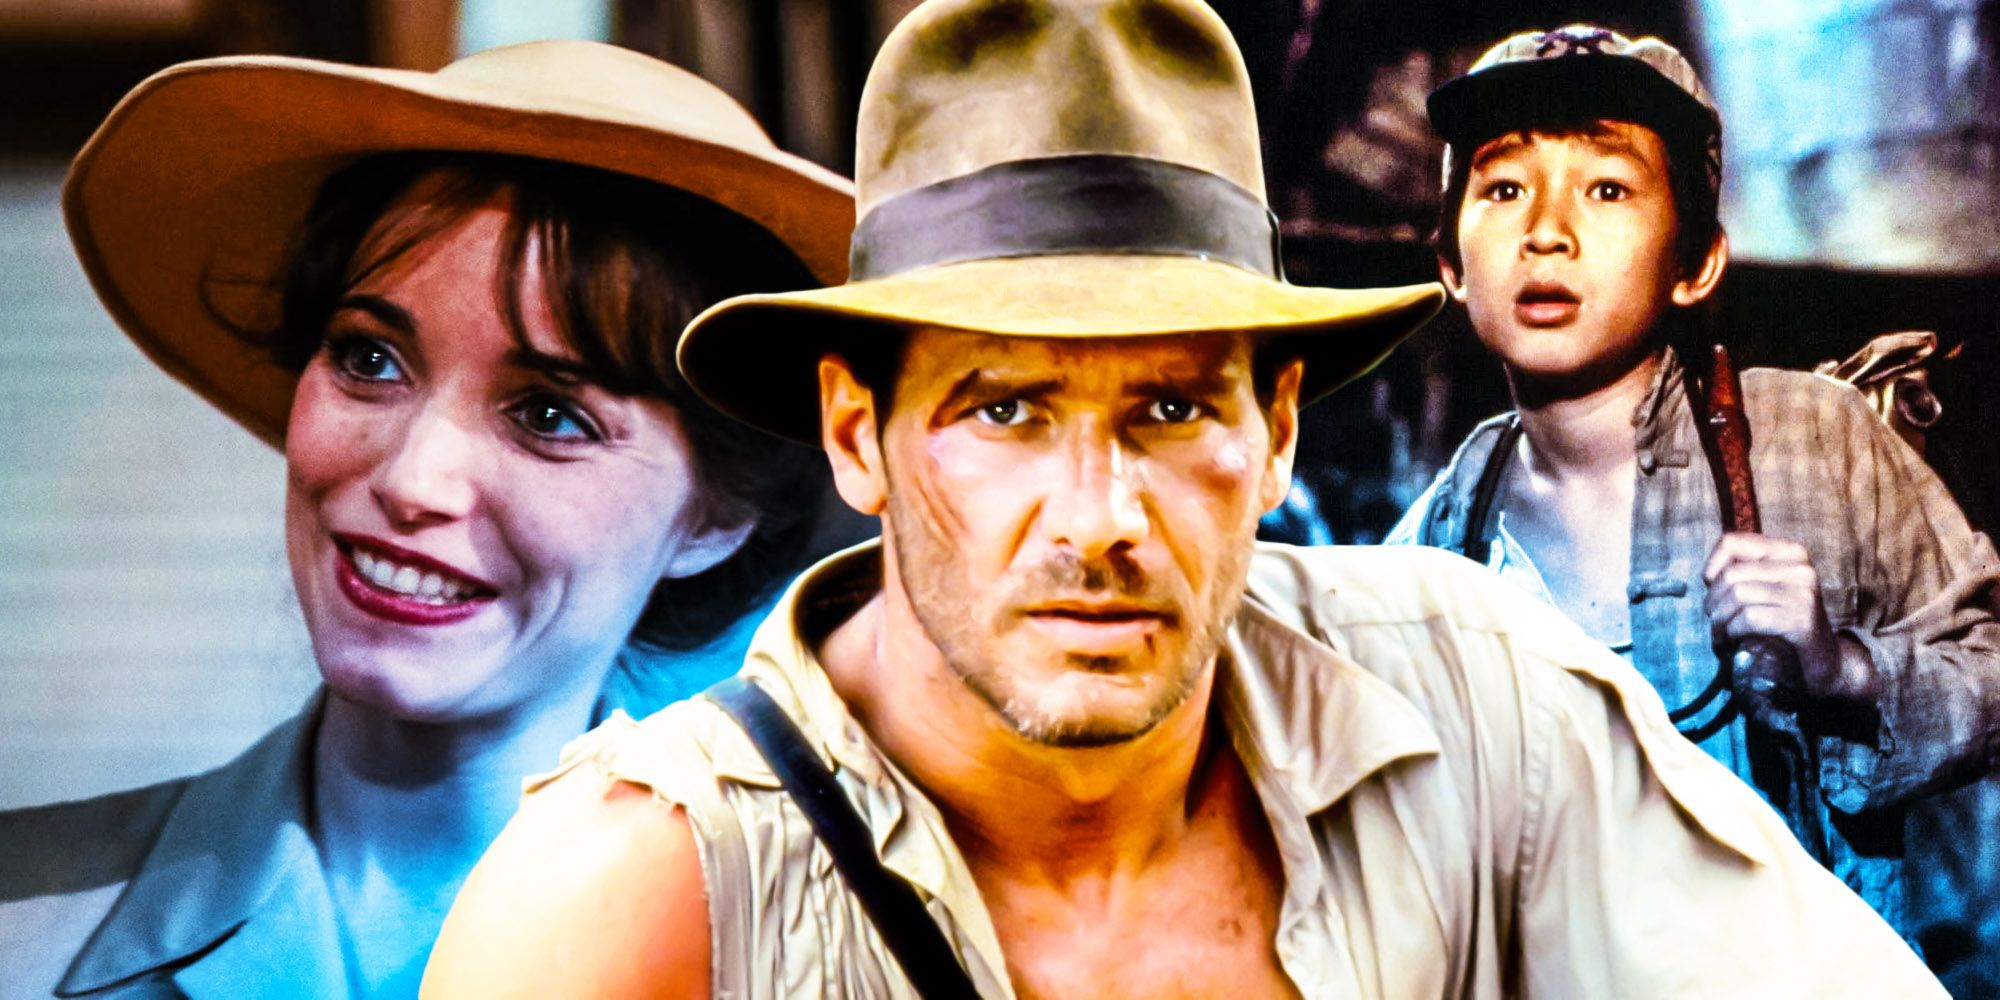 Featured Image: Marion (left); Indiana Jones (center); and Short Round (right)